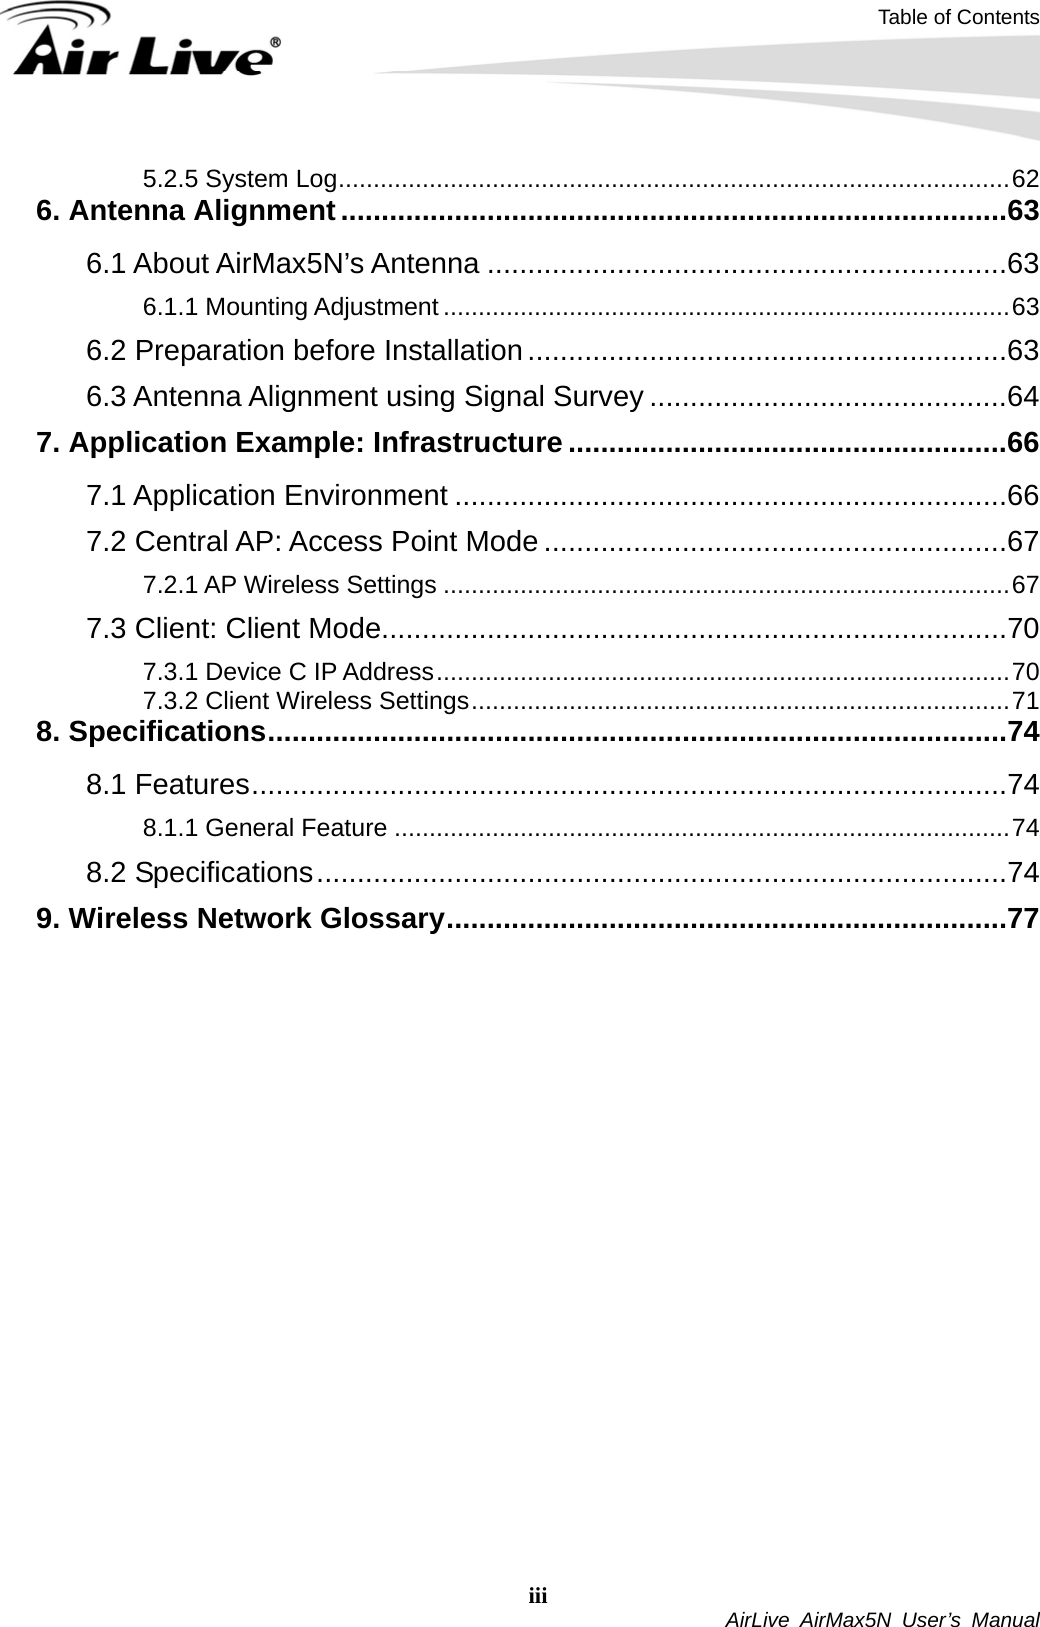 Table of Contents iii  AirLive AirMax5N User’s Manual 5.2.5 System Log................................................................................................62 6. Antenna Alignment..................................................................................63 6.1 About AirMax5N’s Antenna ................................................................63 6.1.1 Mounting Adjustment .................................................................................63 6.2 Preparation before Installation ...........................................................63 6.3 Antenna Alignment using Signal Survey ............................................64 7. Application Example: Infrastructure ......................................................66 7.1 Application Environment ....................................................................66 7.2 Central AP: Access Point Mode .........................................................67 7.2.1 AP Wireless Settings .................................................................................67 7.3 Client: Client Mode.............................................................................70 7.3.1 Device C IP Address..................................................................................70 7.3.2 Client Wireless Settings.............................................................................71 8. Specifications...........................................................................................74 8.1 Features.............................................................................................74 8.1.1 General Feature ........................................................................................74 8.2 Specifications.....................................................................................74 9. Wireless Network Glossary.....................................................................77  